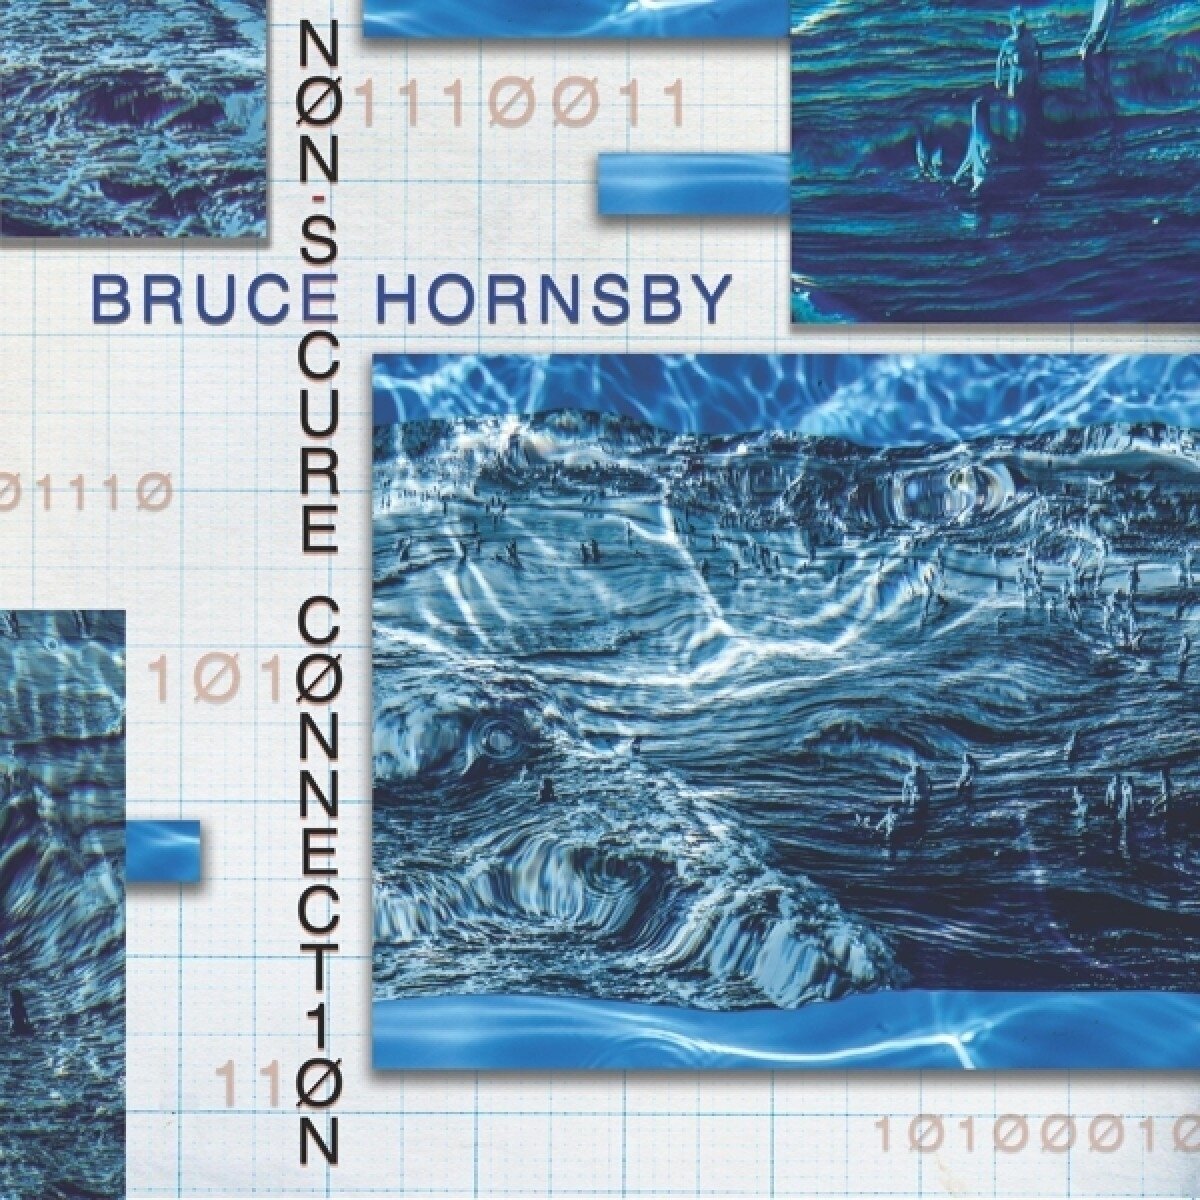 Płyta winylowa Bruce Hornsby - Non-Secure Connection (LP)